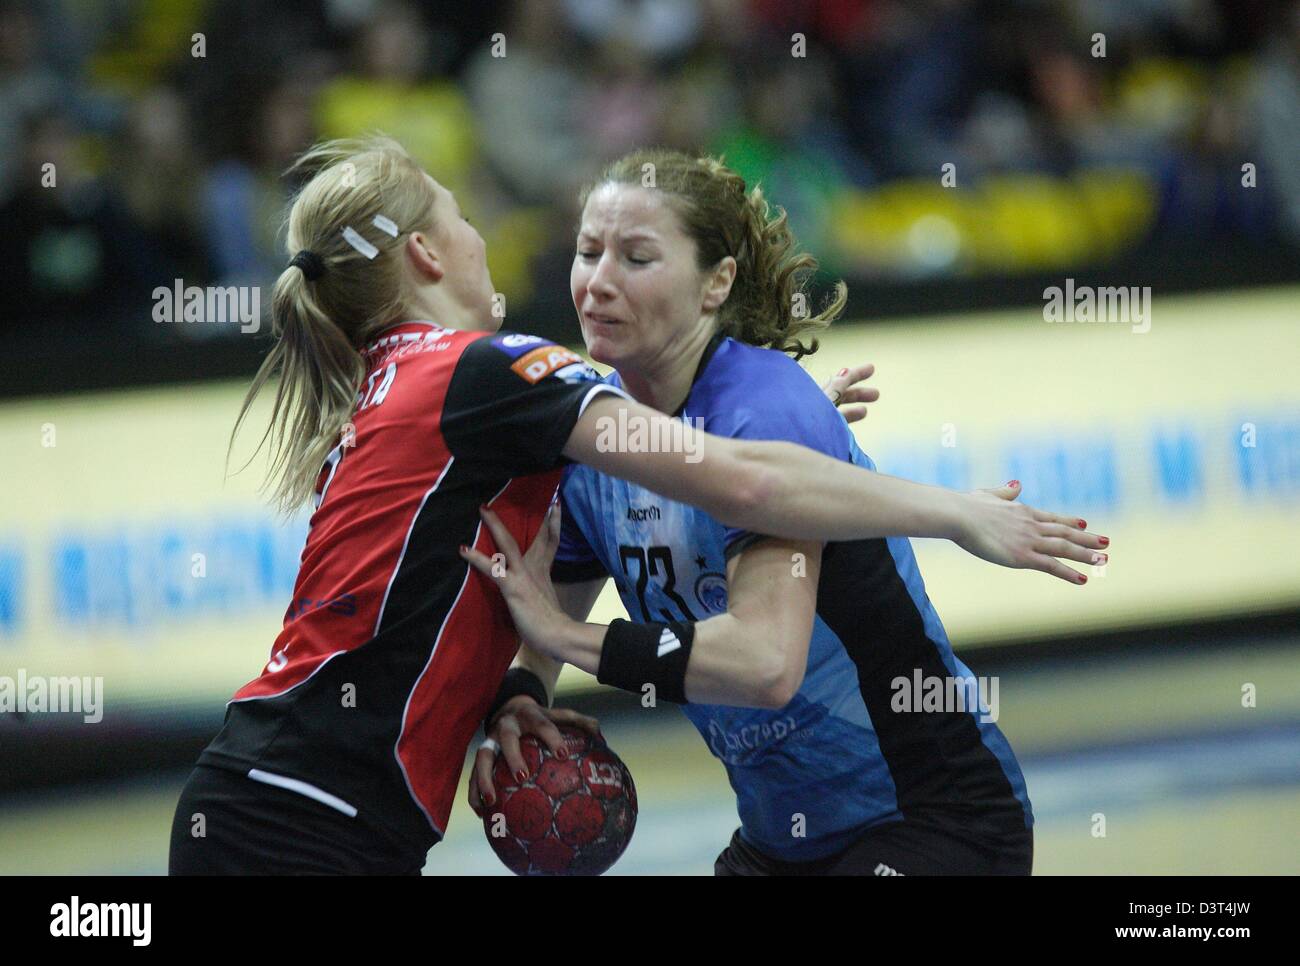 Poland 24th, February 2013 Handball: Final Four of the PGNiG Polish Cup. Vistal Laczpol Gdynia v KPR Ruch Chorzow game for 3th place in the Cup at HSW sports hall in Gdynia. Mateescu Loredana (23) in action during the game Stock Photo